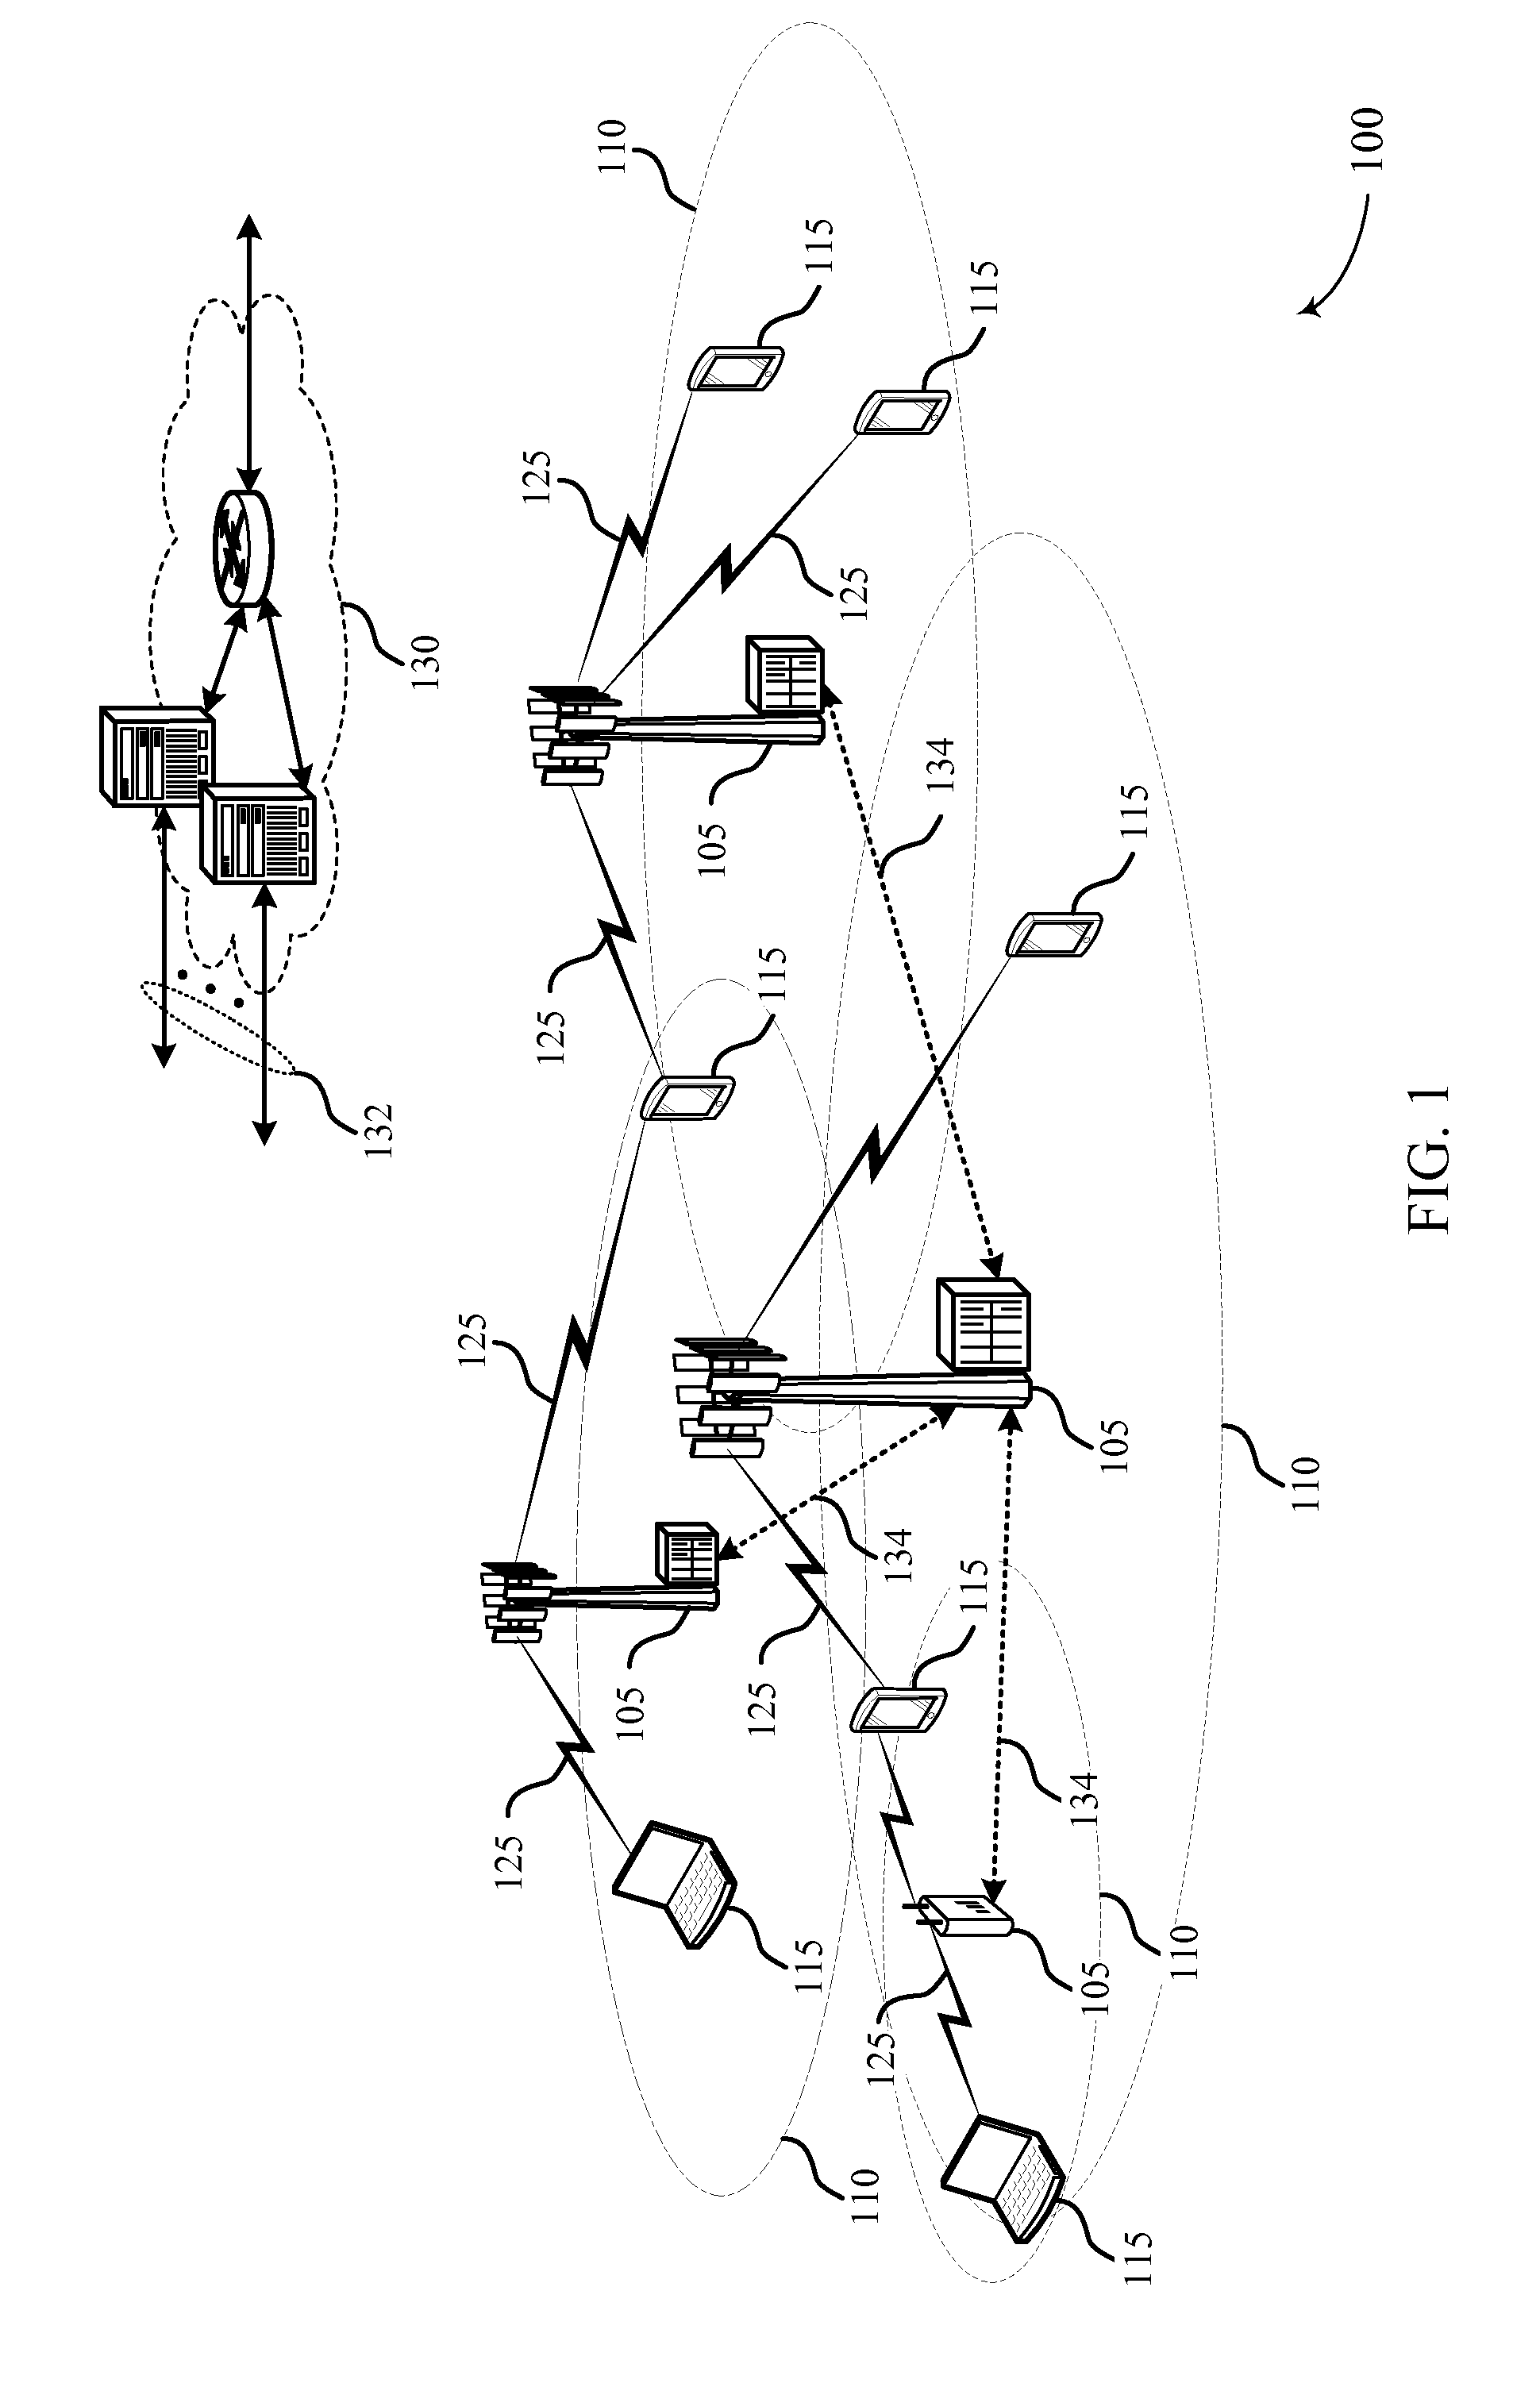 Techniques for beam shaping at a millimeter wave base station and a wireless device and fast antenna subarray selection at a wireless device